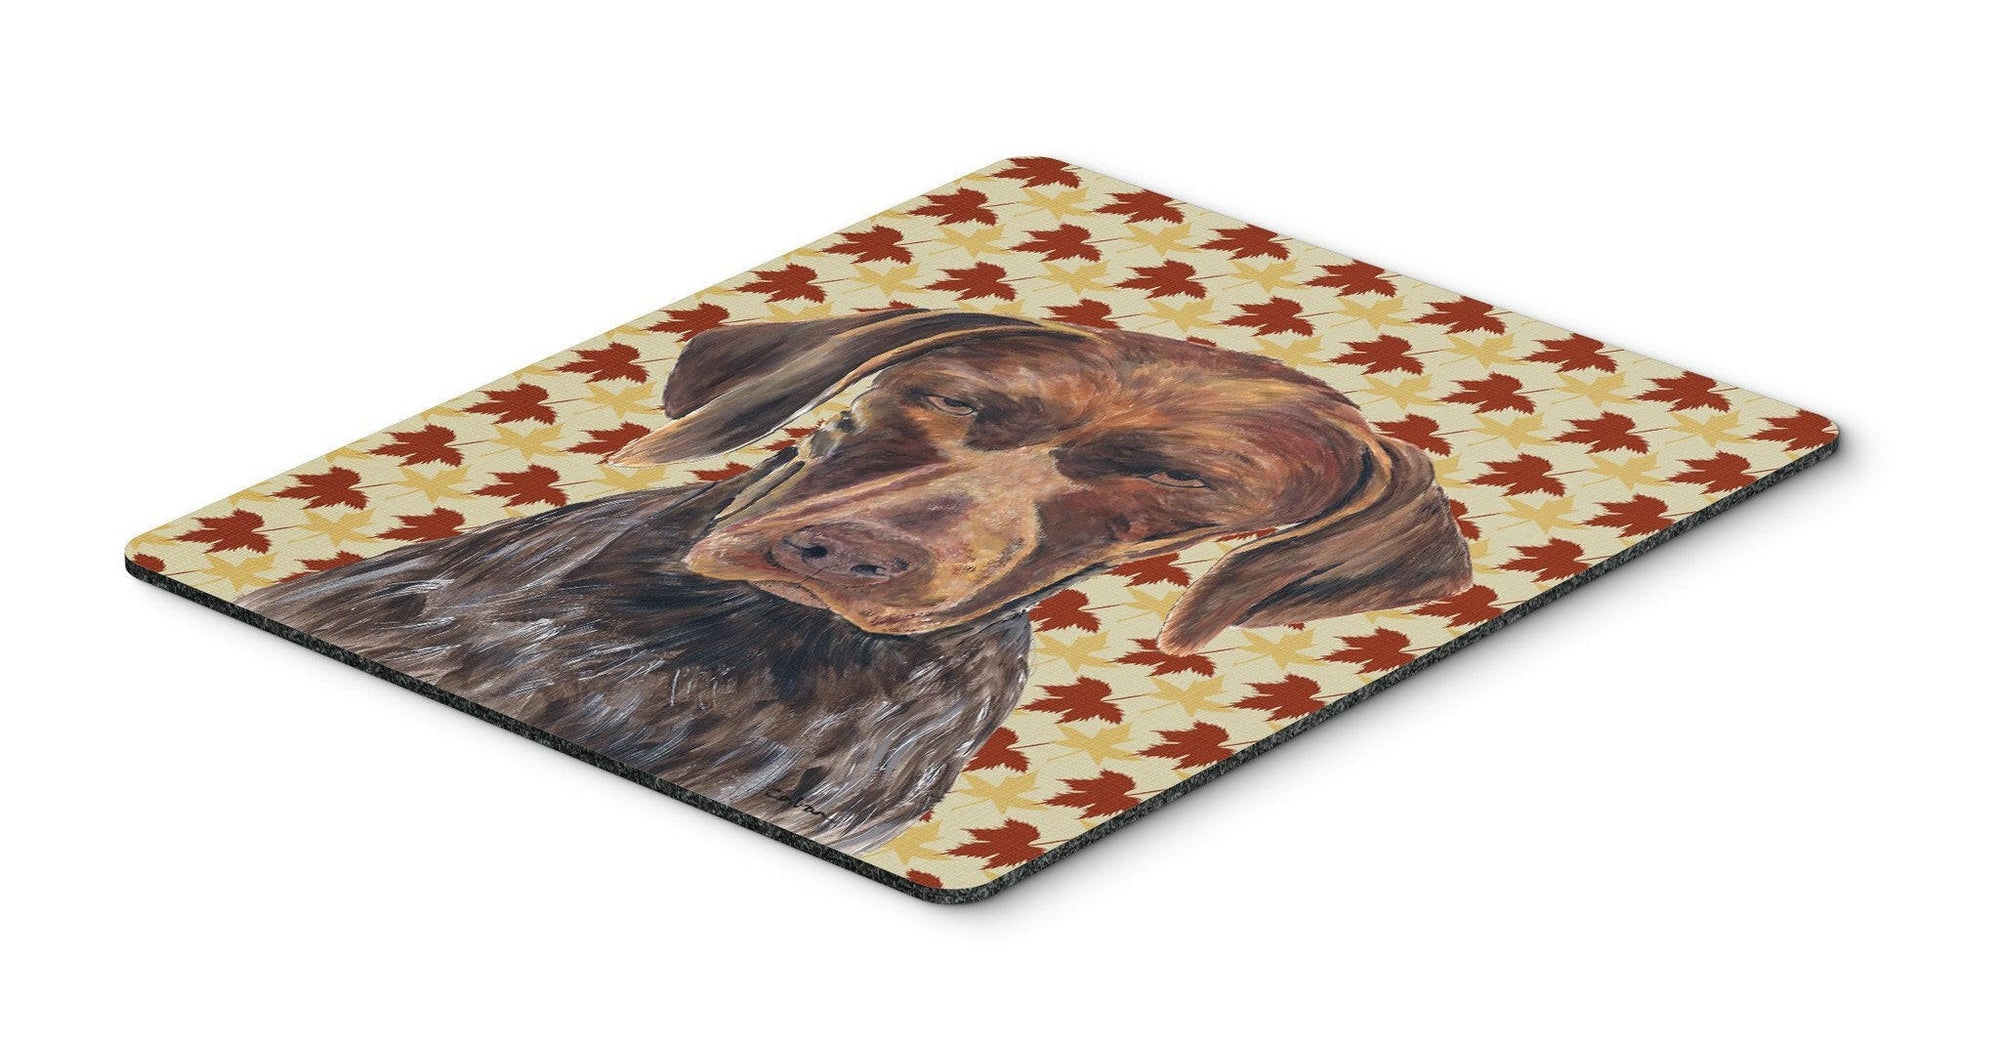 German Shorthaired Pointer Fall Leaves Portrait Mouse Pad, Hot Pad or Trivet by Caroline's Treasures